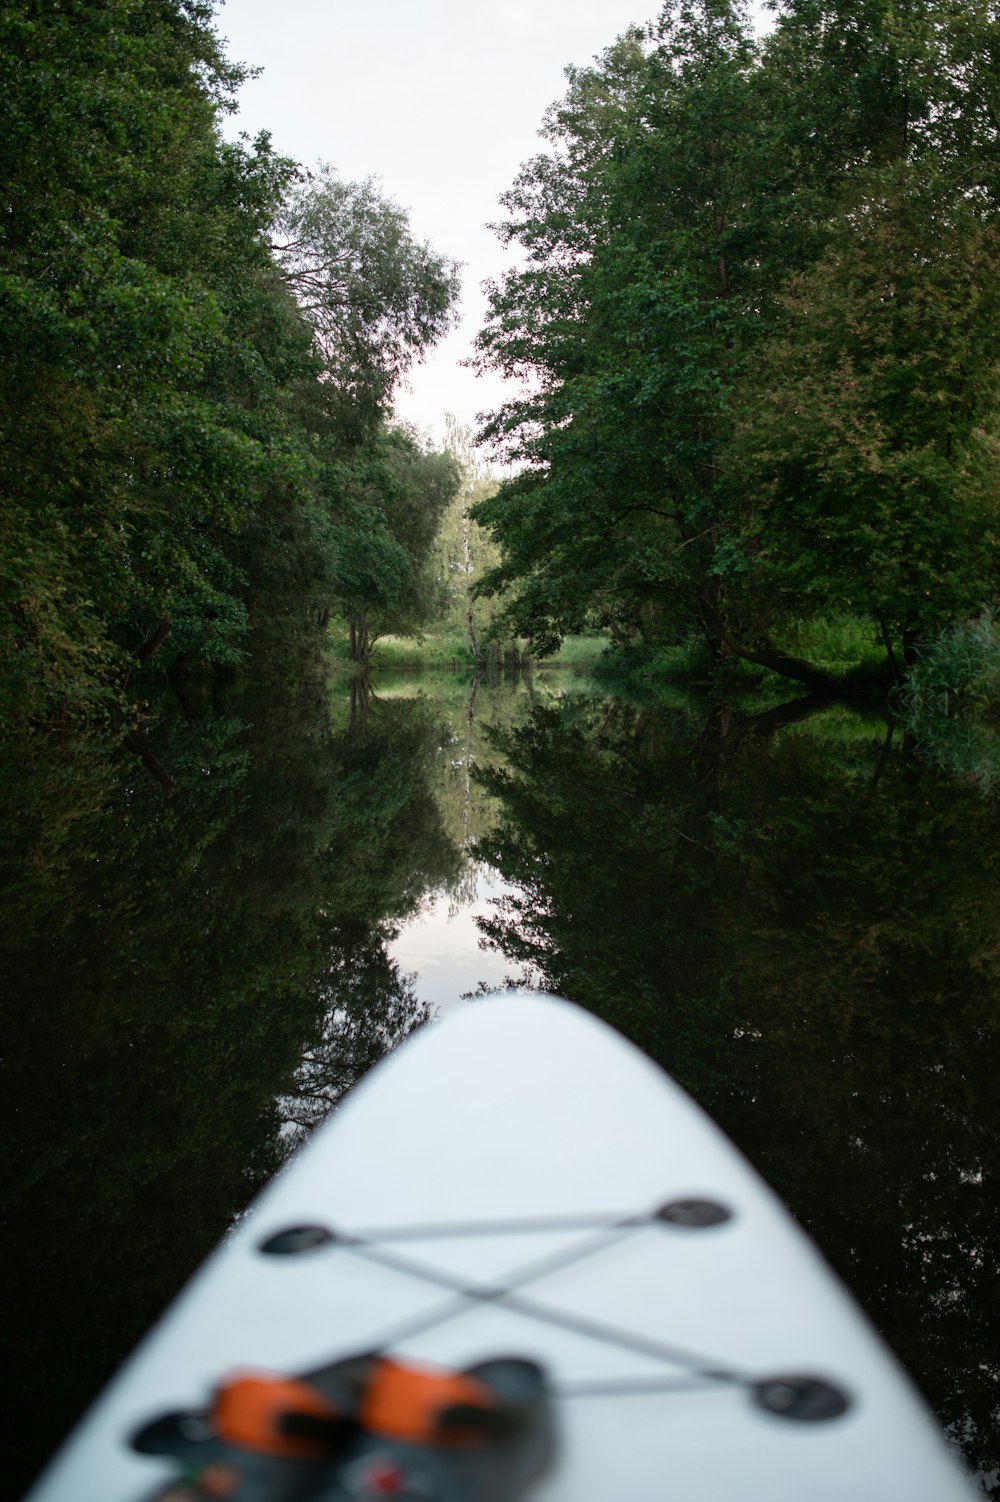 a view of the back of a kayak on a river